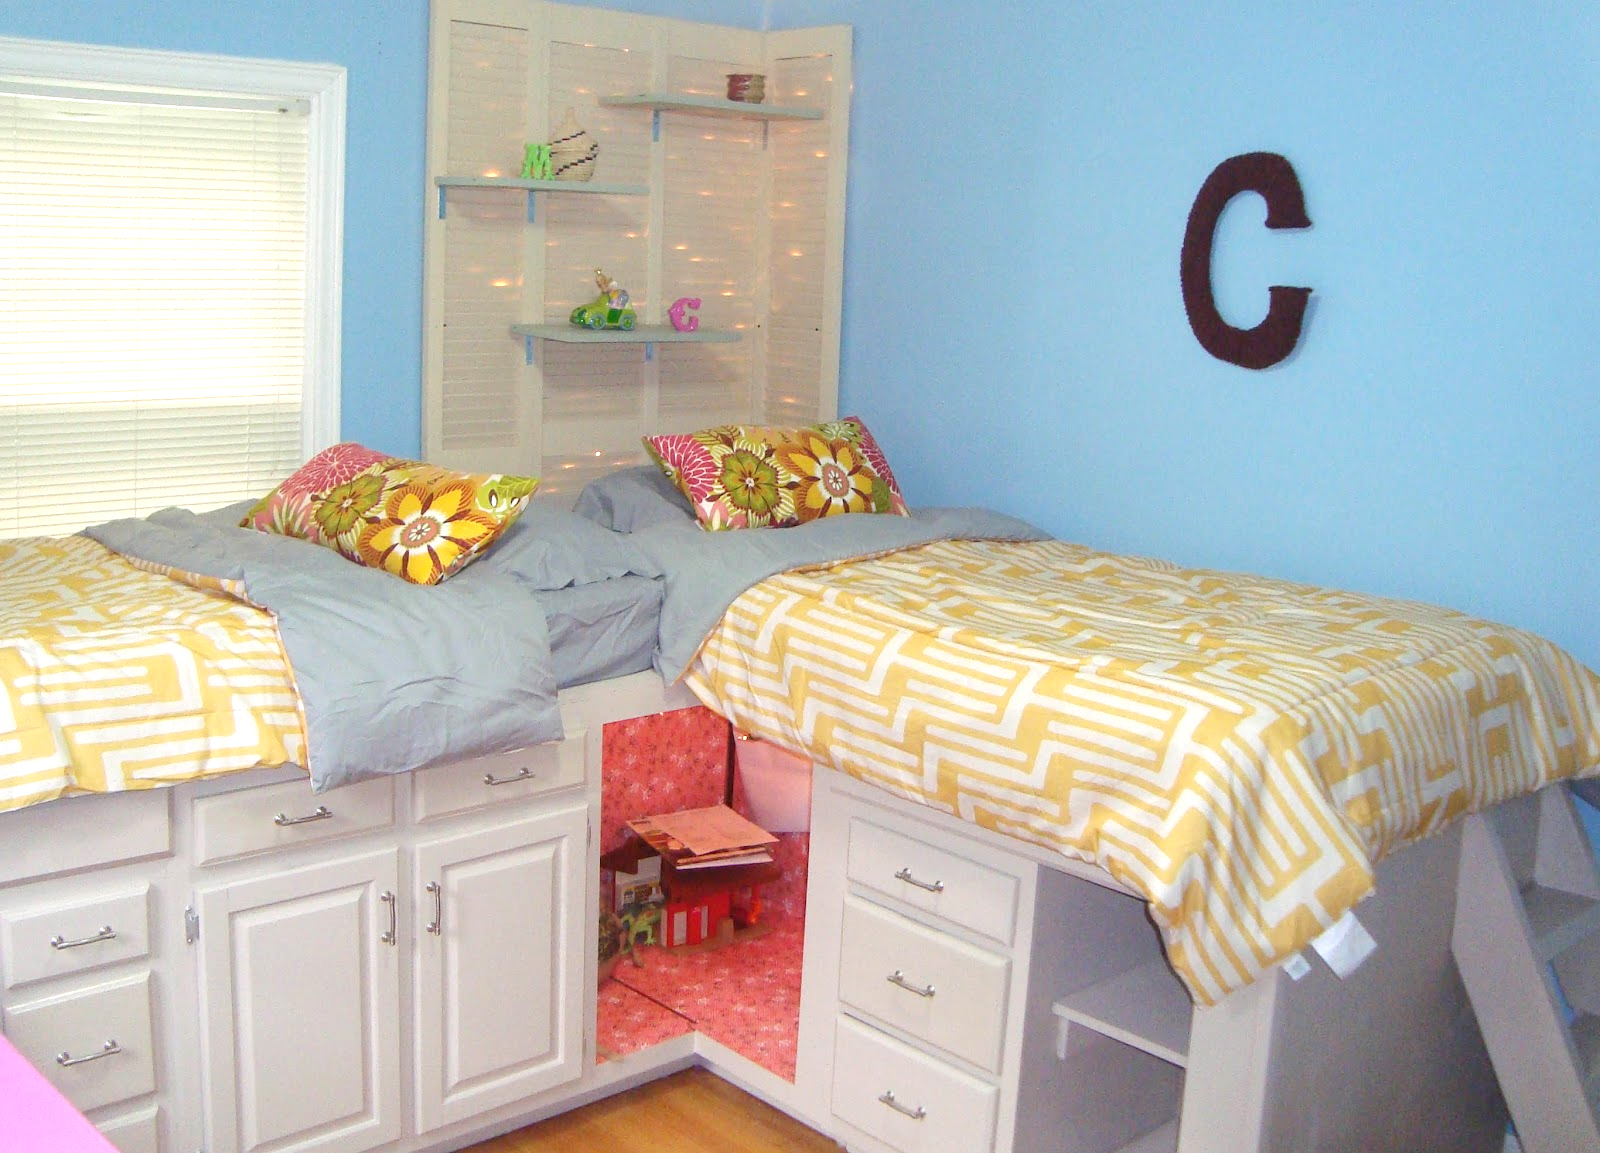 8 Diy Storage Beds To Add Extra Space, Build A Twin Bed With Storage